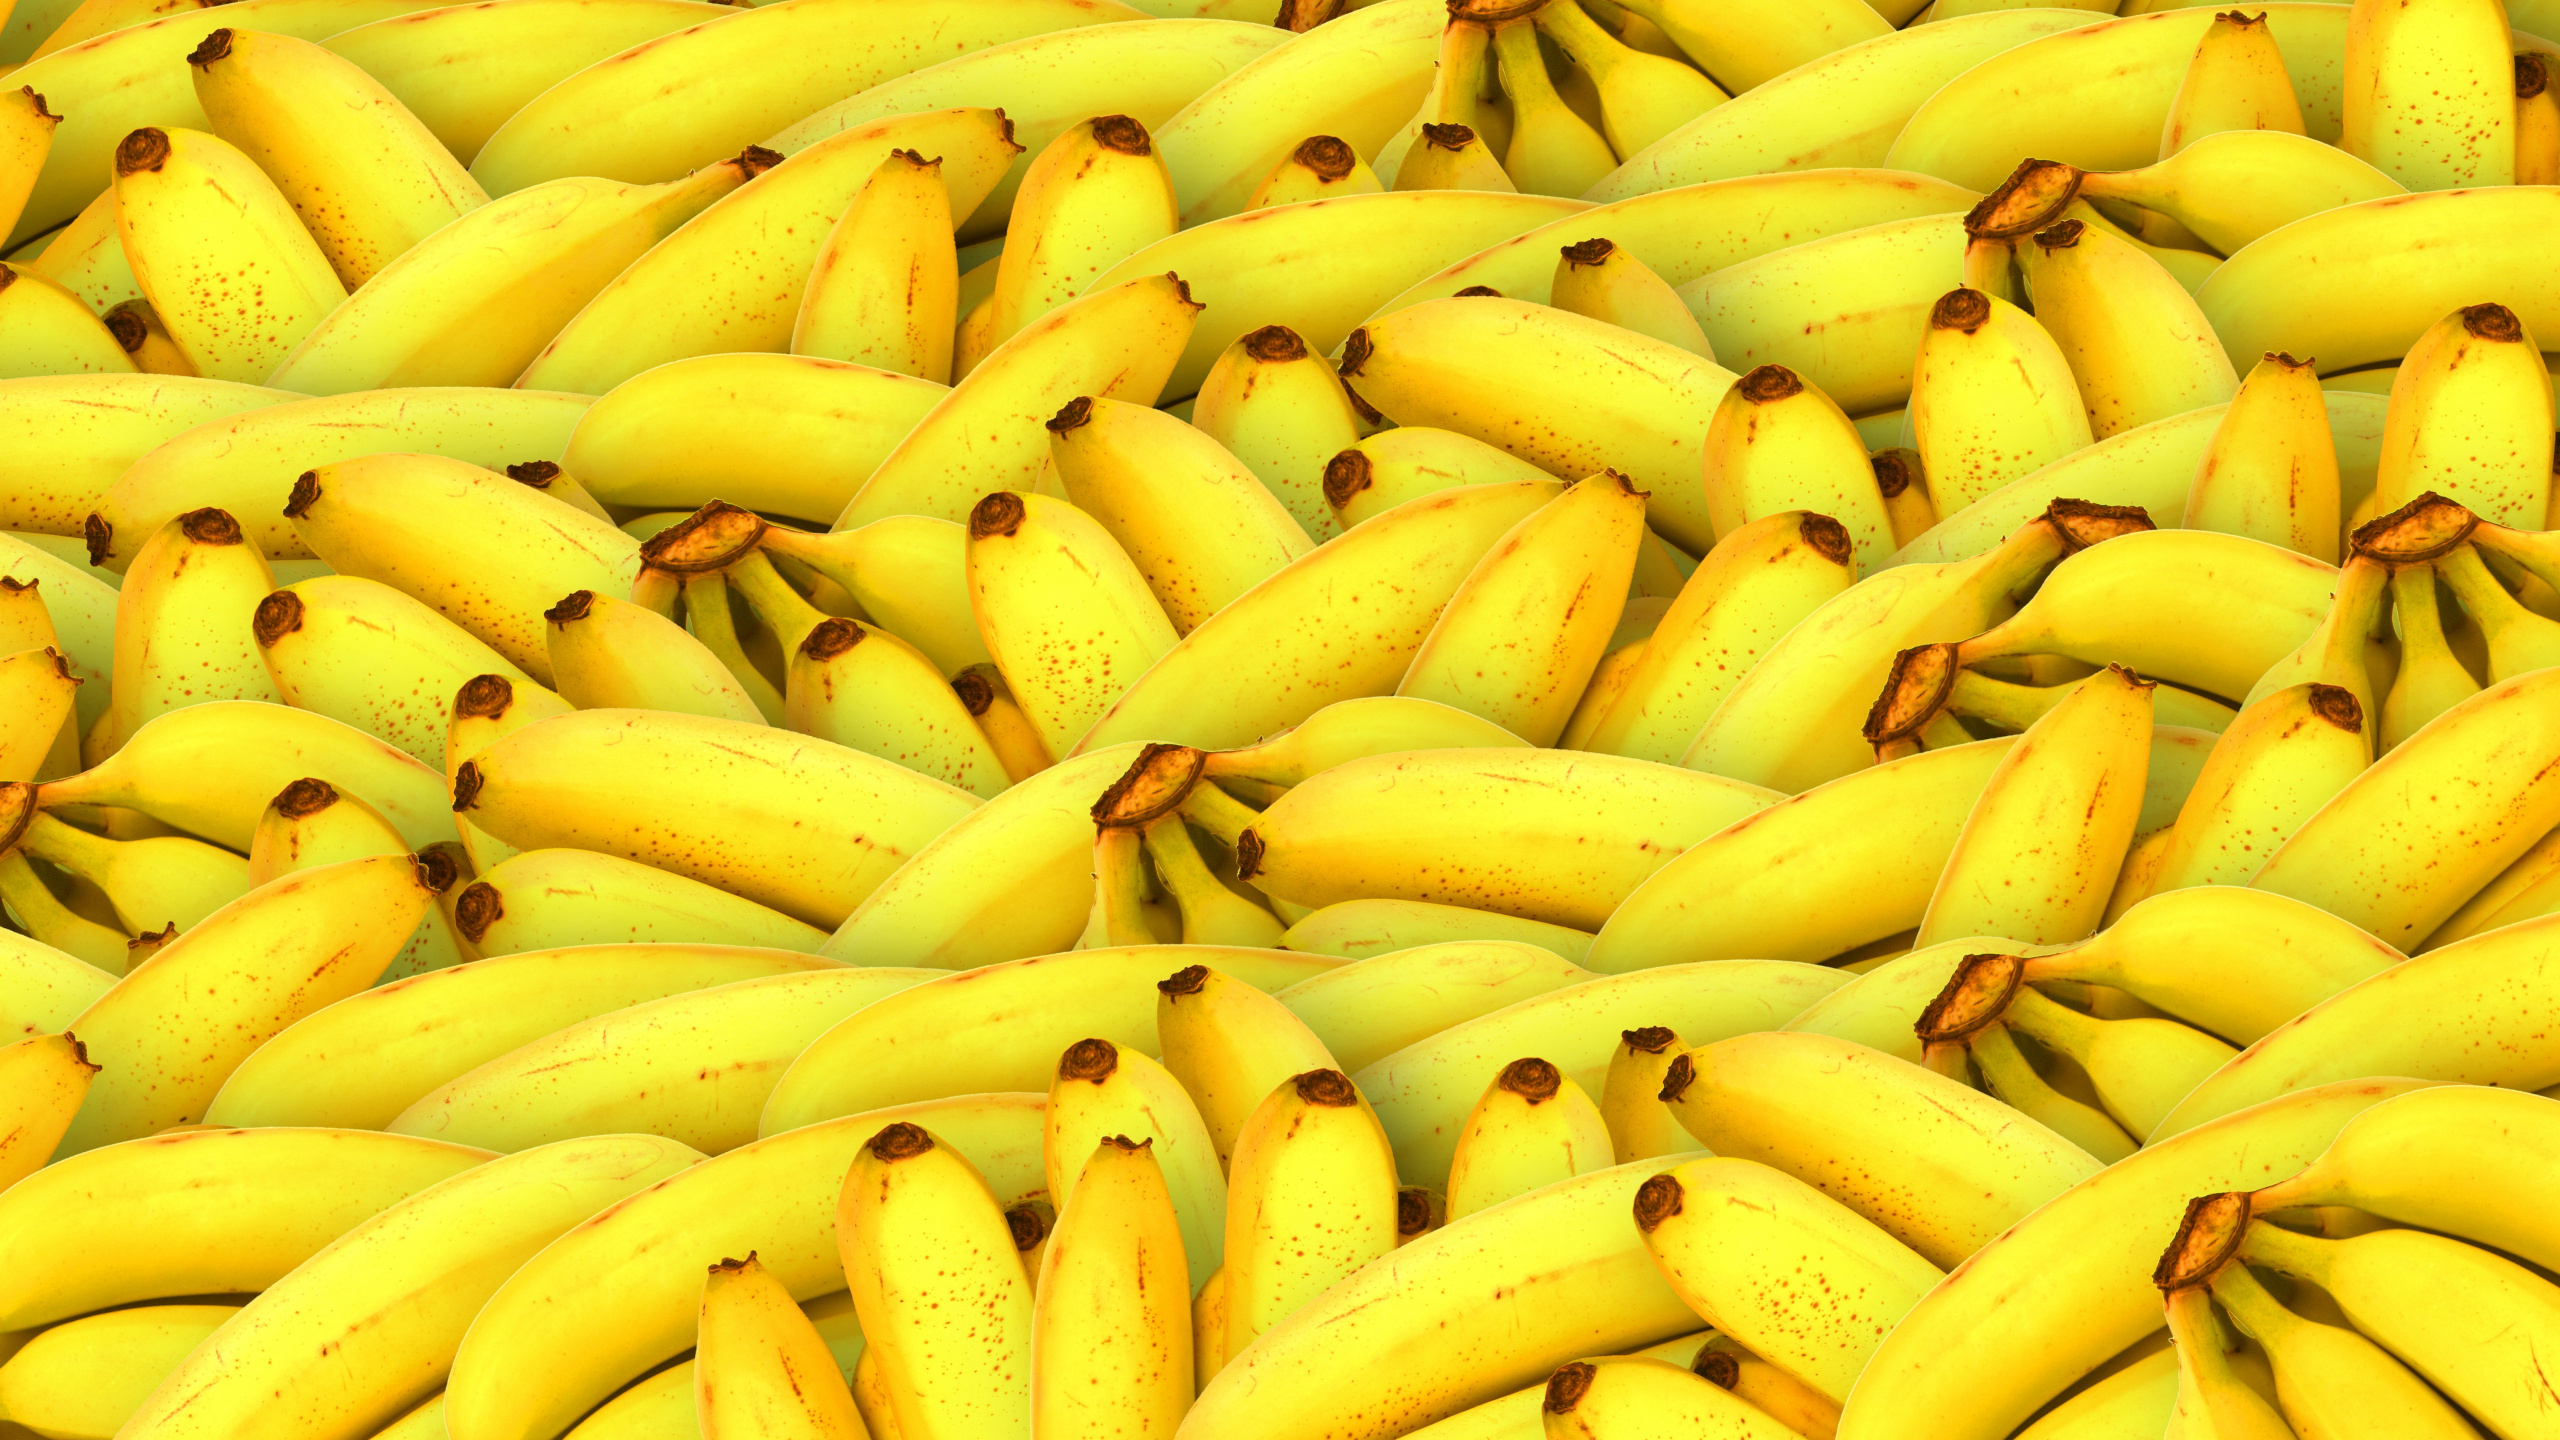 Yellow Banana Fruit on Brown Wooden Table. Wallpaper in 2560x1440 Resolution